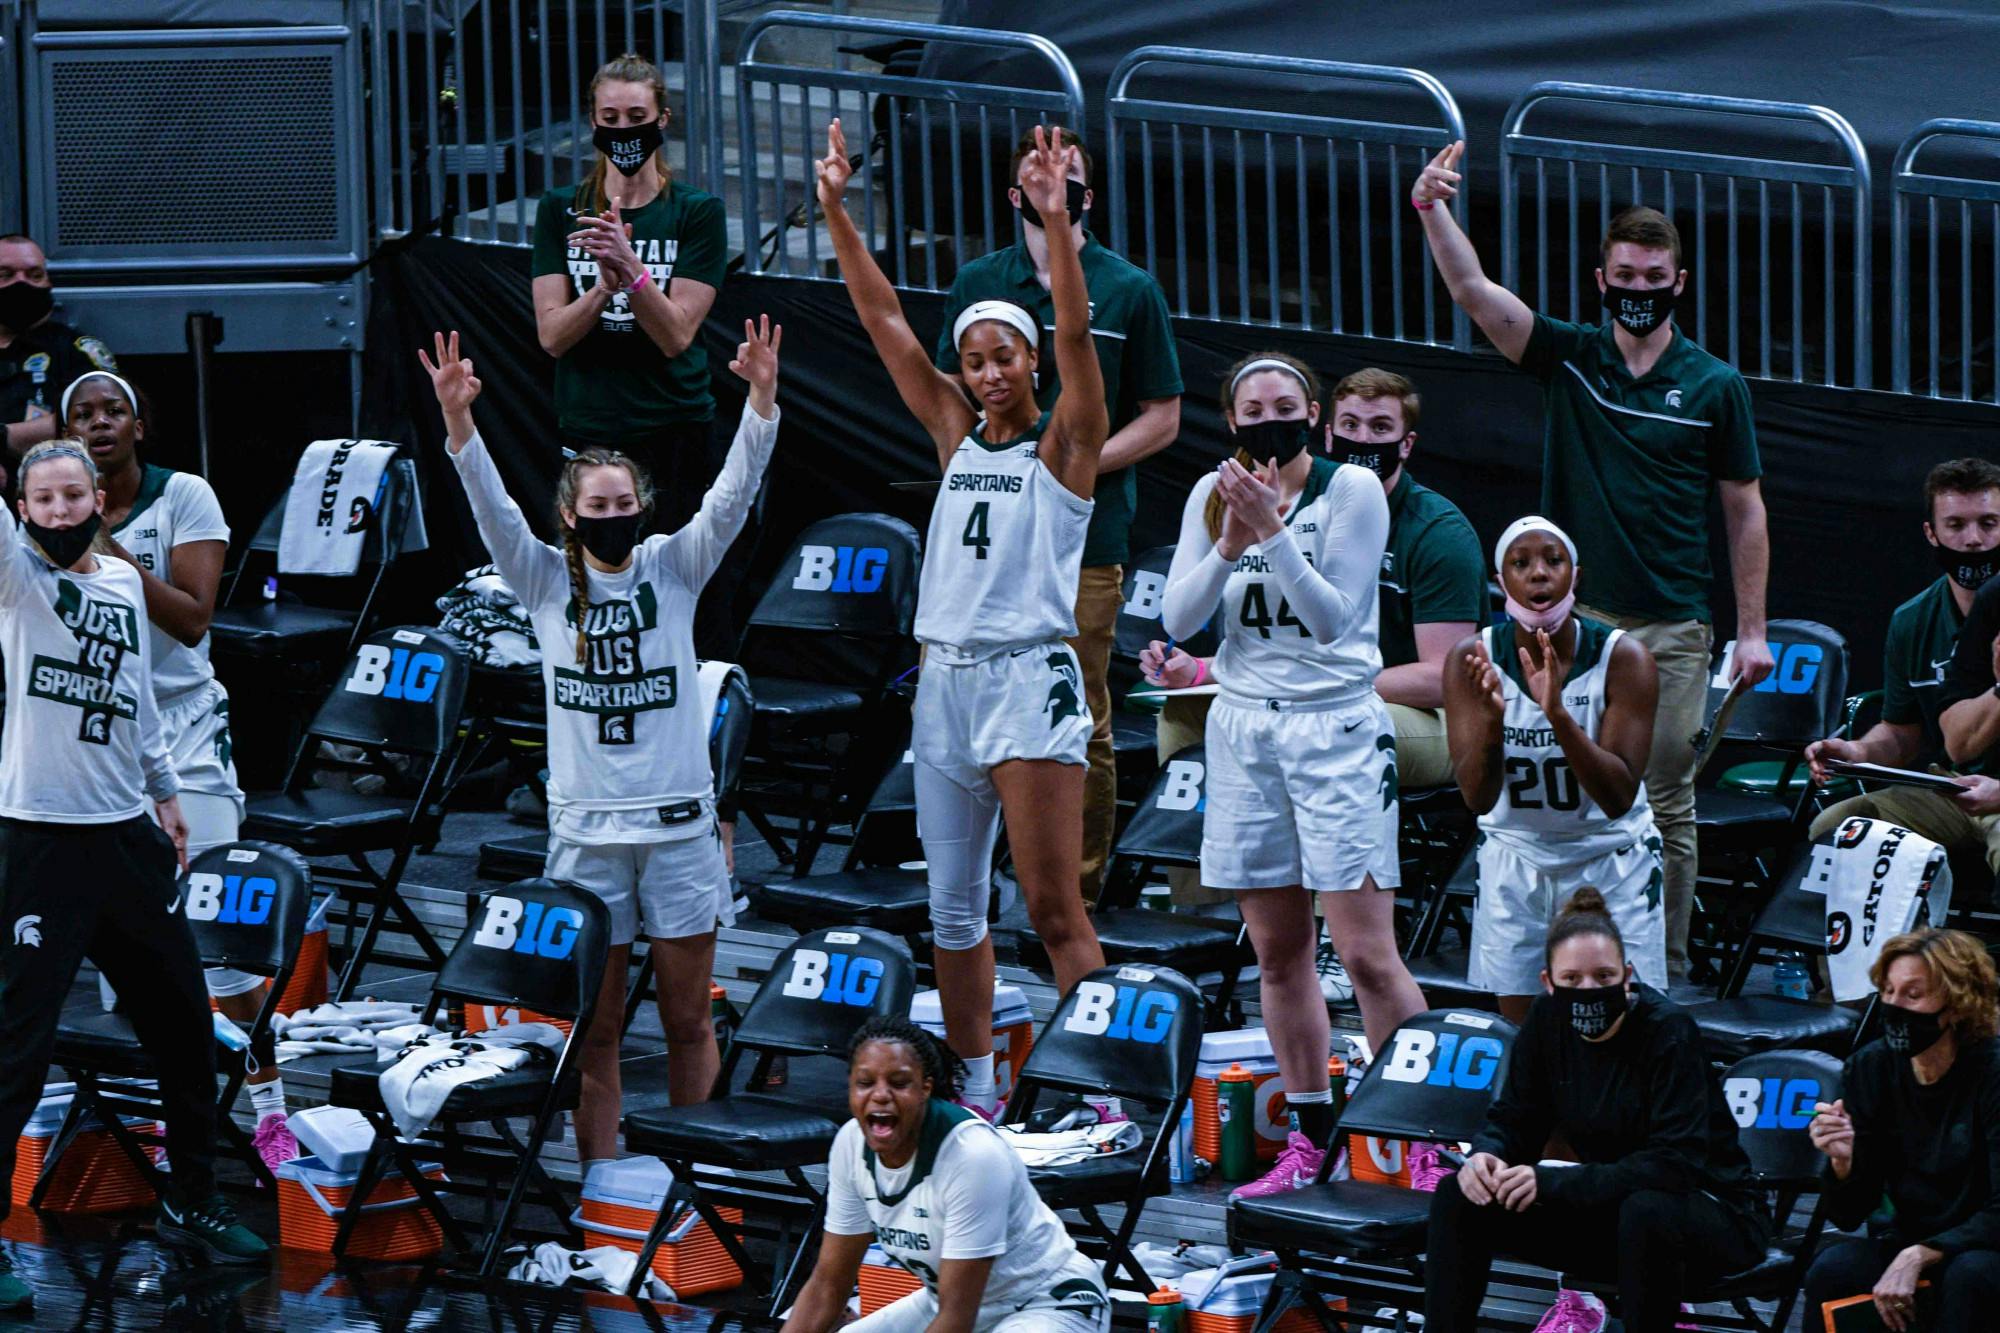 <p>The Spartans defeated the Lady Lions, 75-66, on the second day of the Big Ten Tournament hosted at Bankers Life Fieldhouse in Indianapolis. Shot on March 10, 2021.</p>